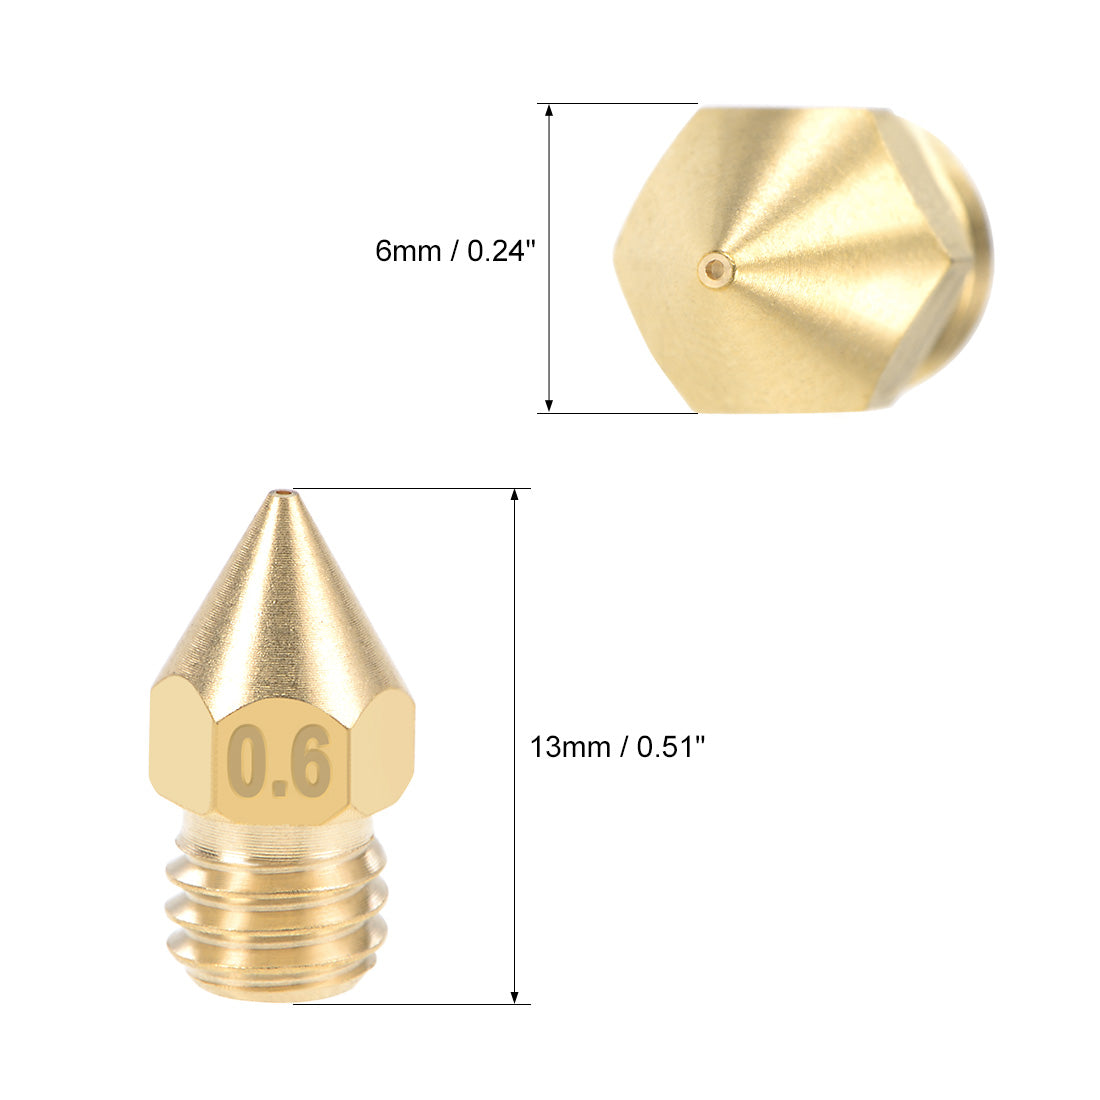 uxcell Uxcell 0.6mm 3D Printer Nozzle Head M6 for MK8 1.75mm Extruder Print, Brass 5pcs